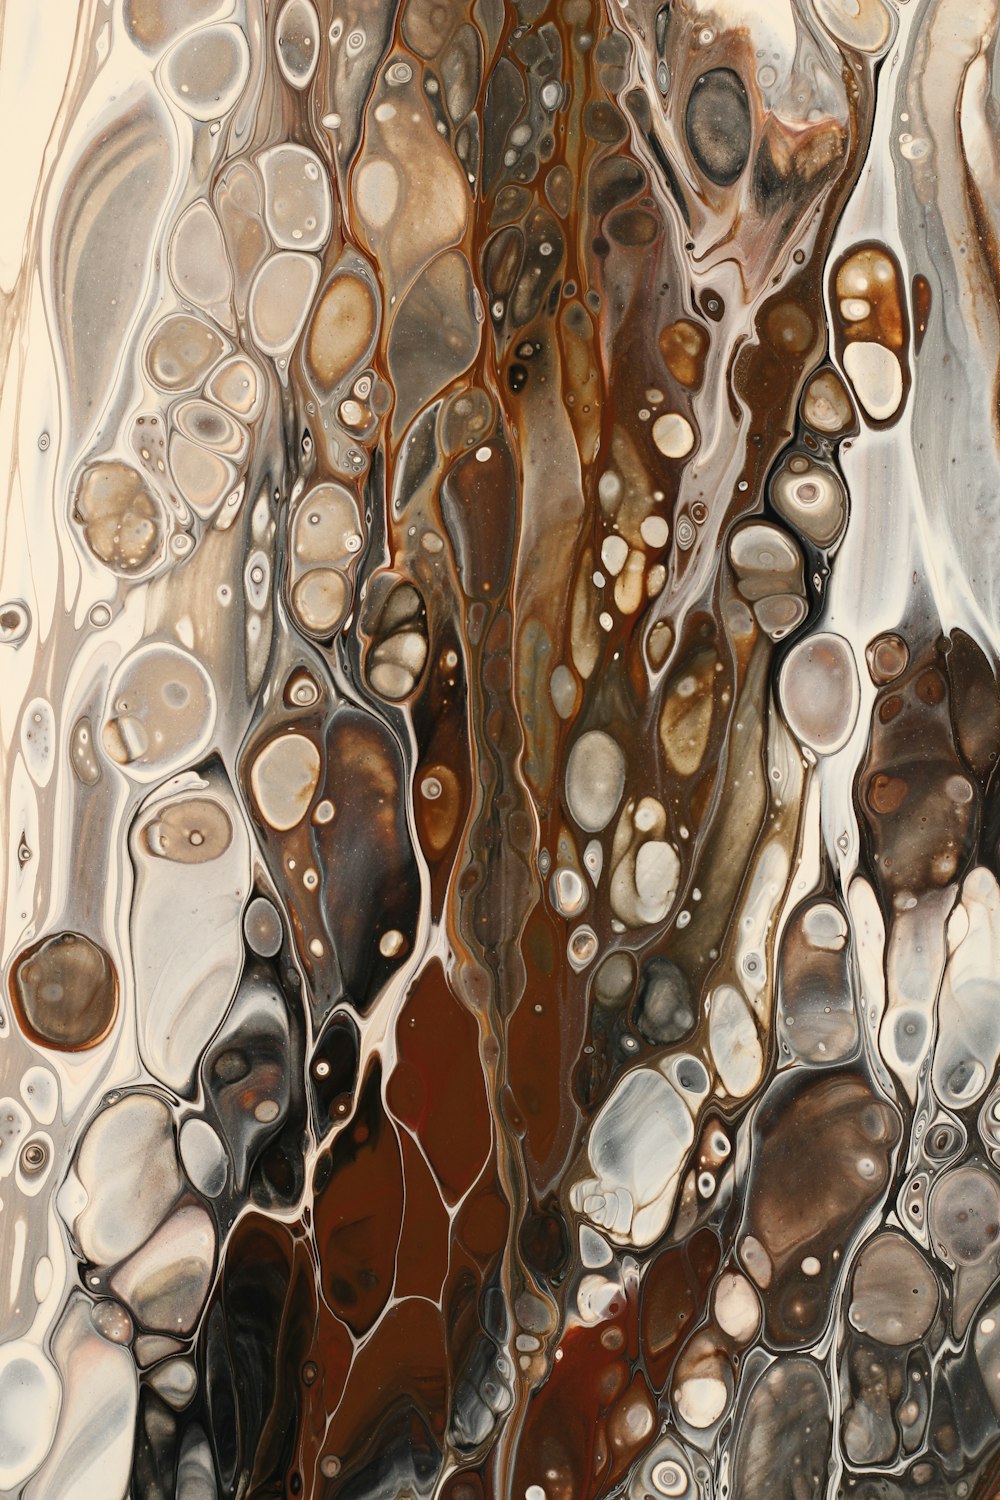 a close up of a painting with lots of bubbles